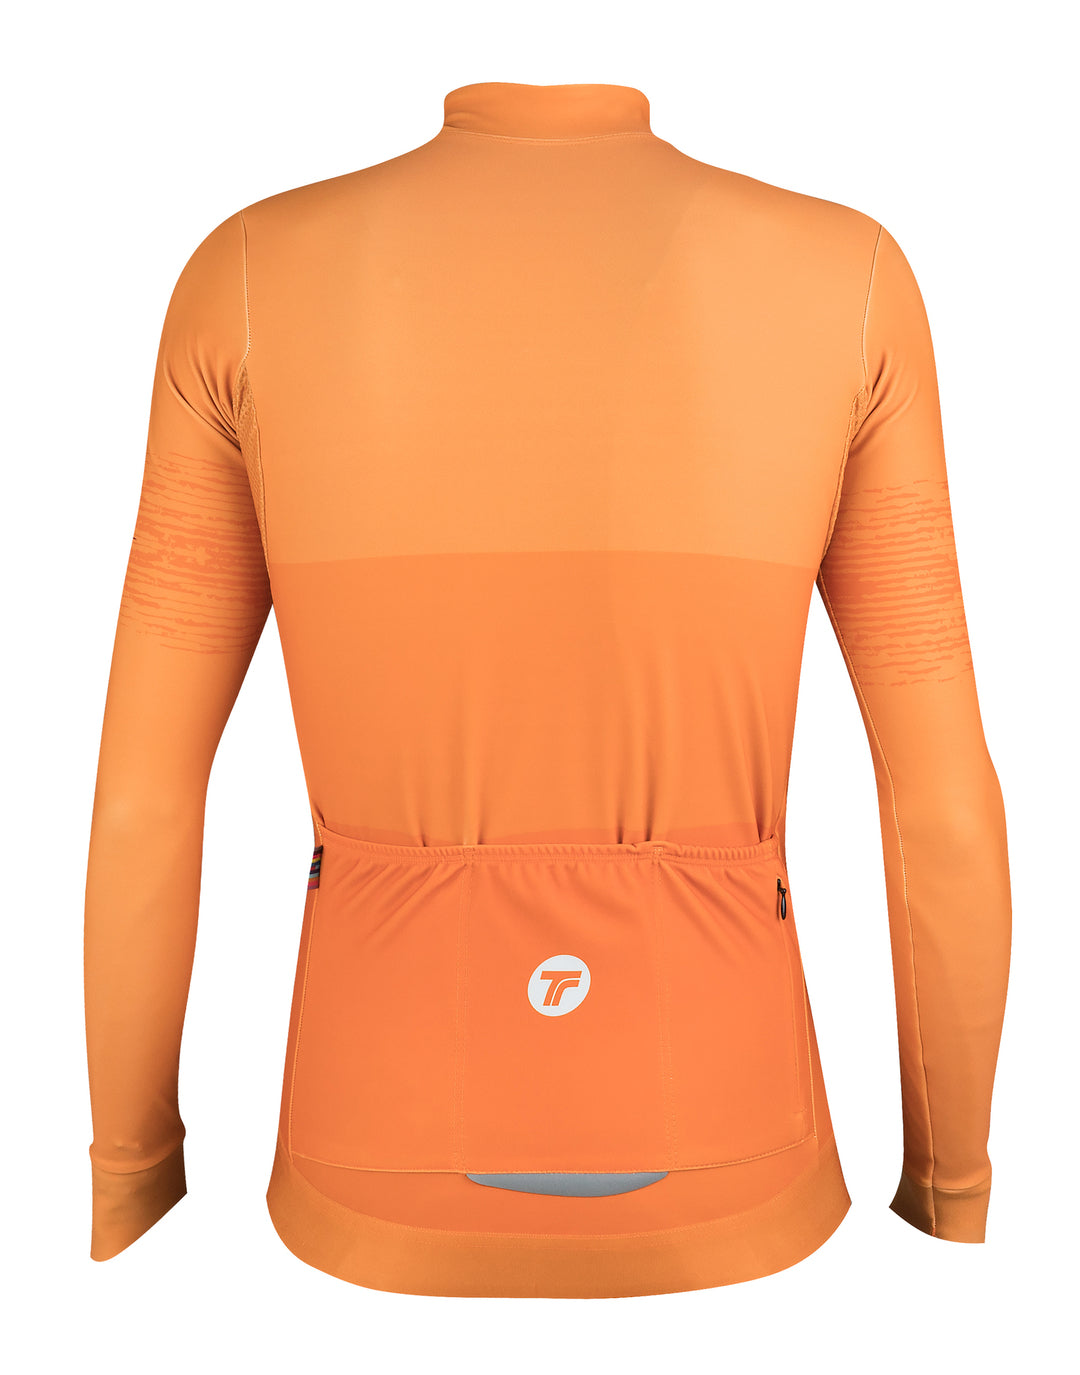 TACTIC Hard Day Long Sleeve Jersey - Pumpkin archived